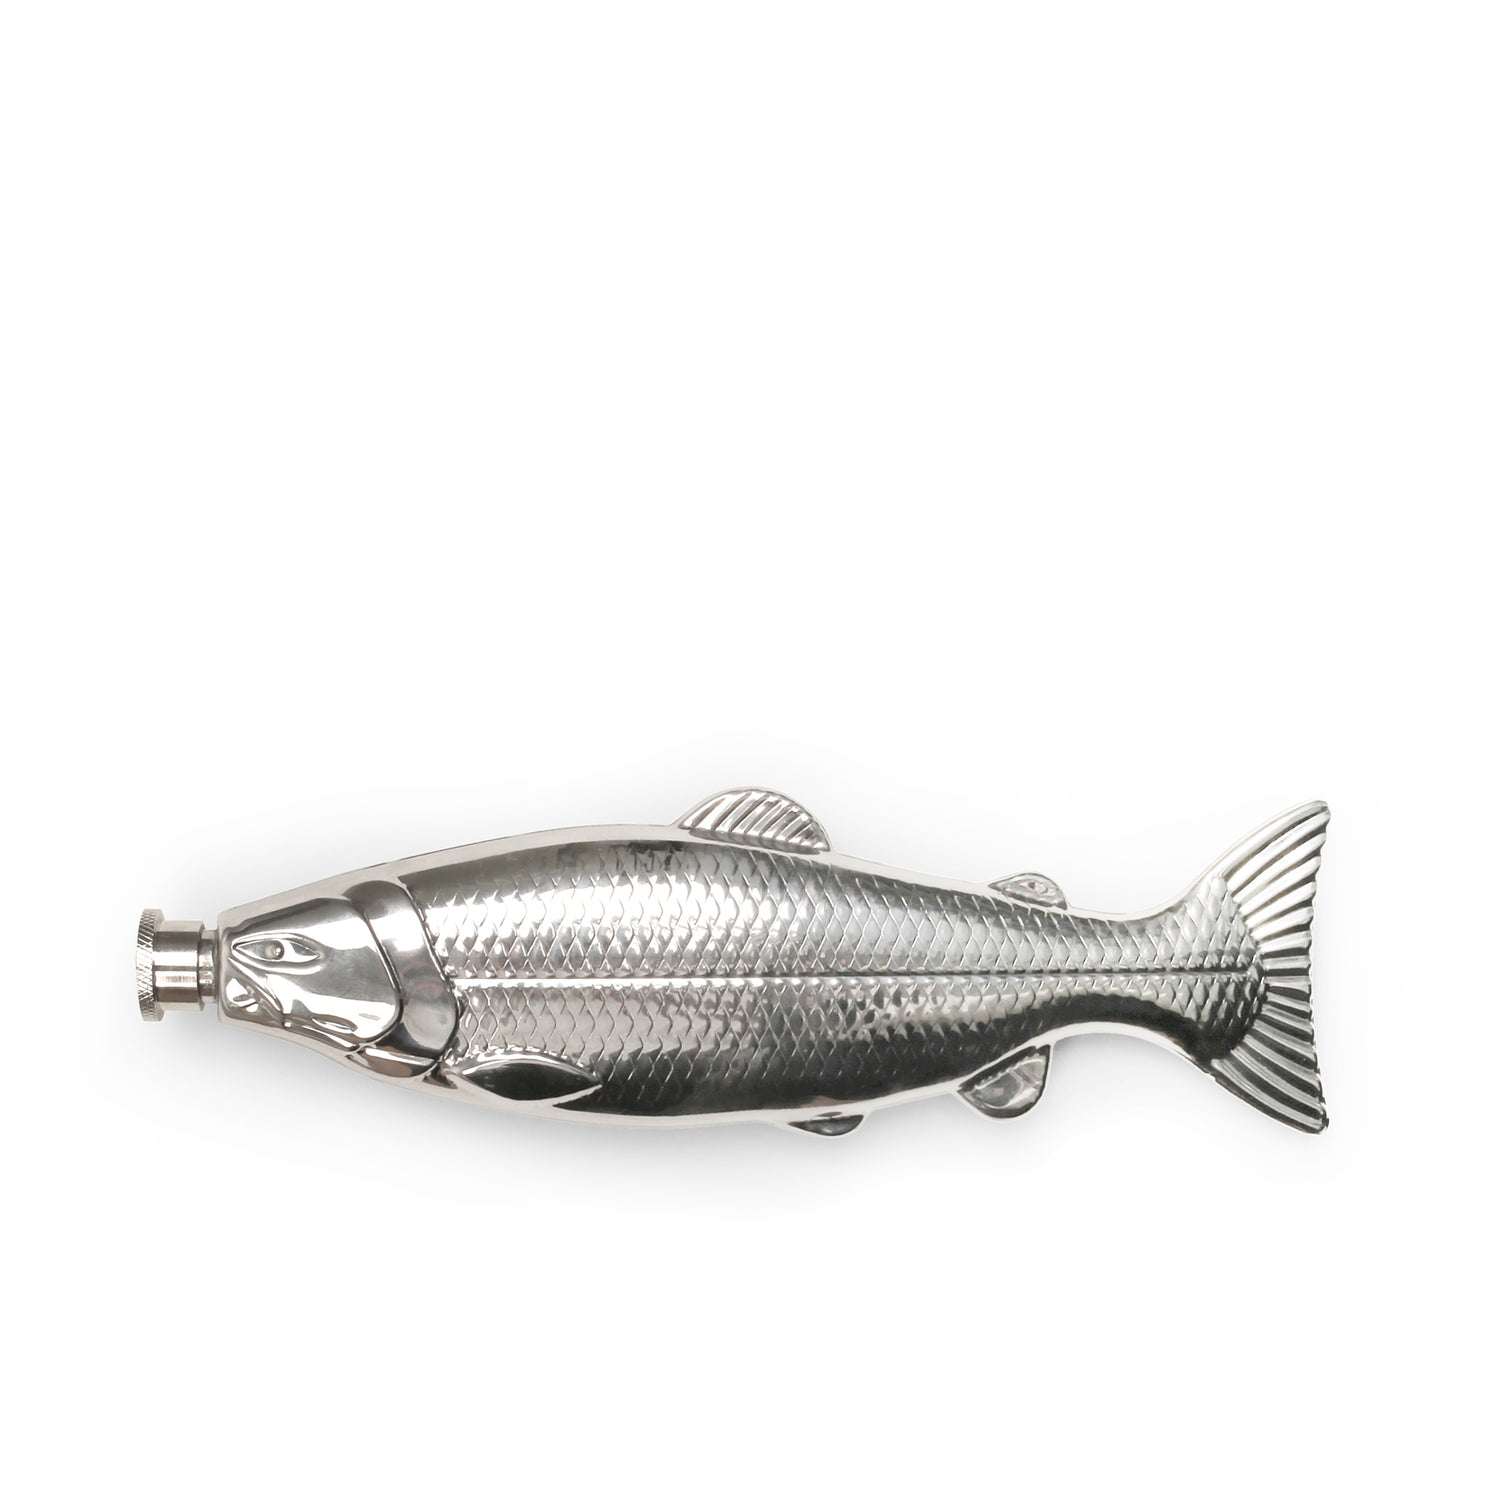 Fish Shaped Flask  Urban Outfitters Mexico - Clothing, Music